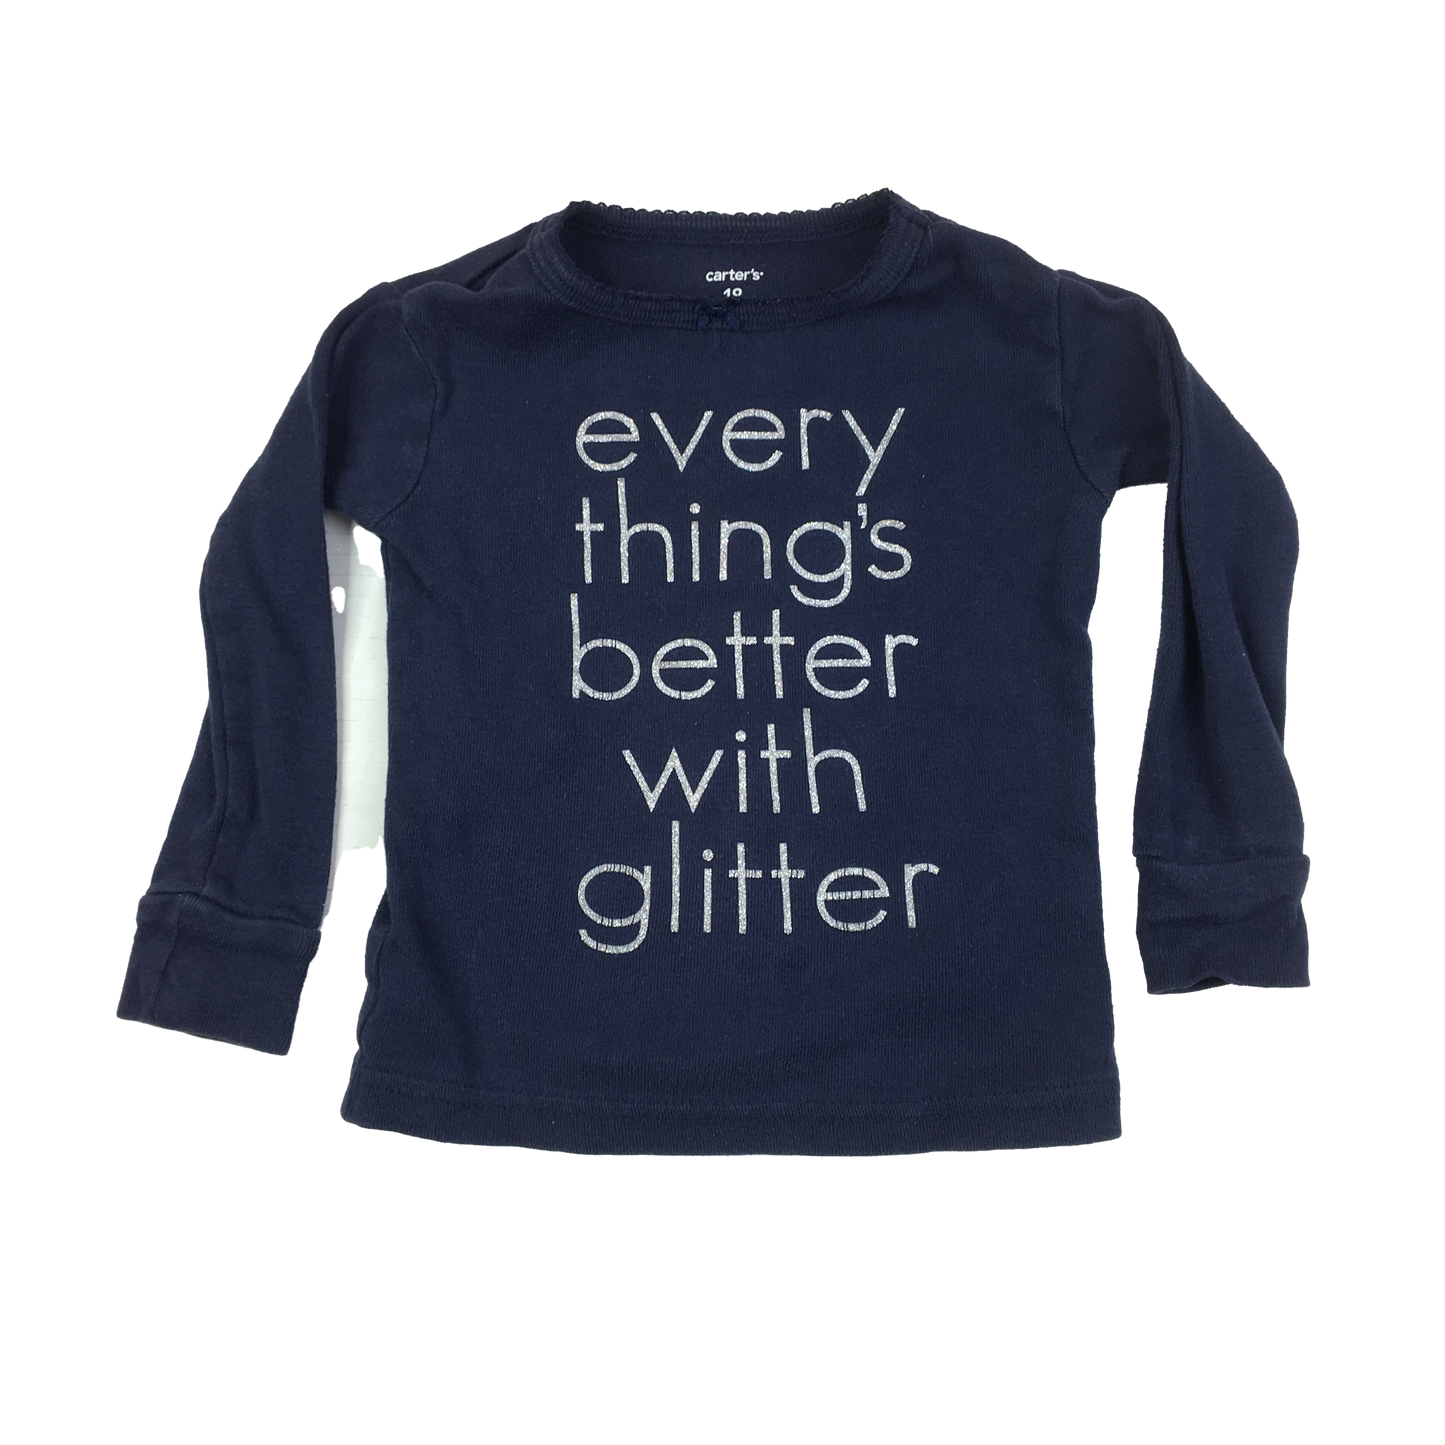 Carter's Navy Long Sleeve with "Every Things Better With Glitter" 18M